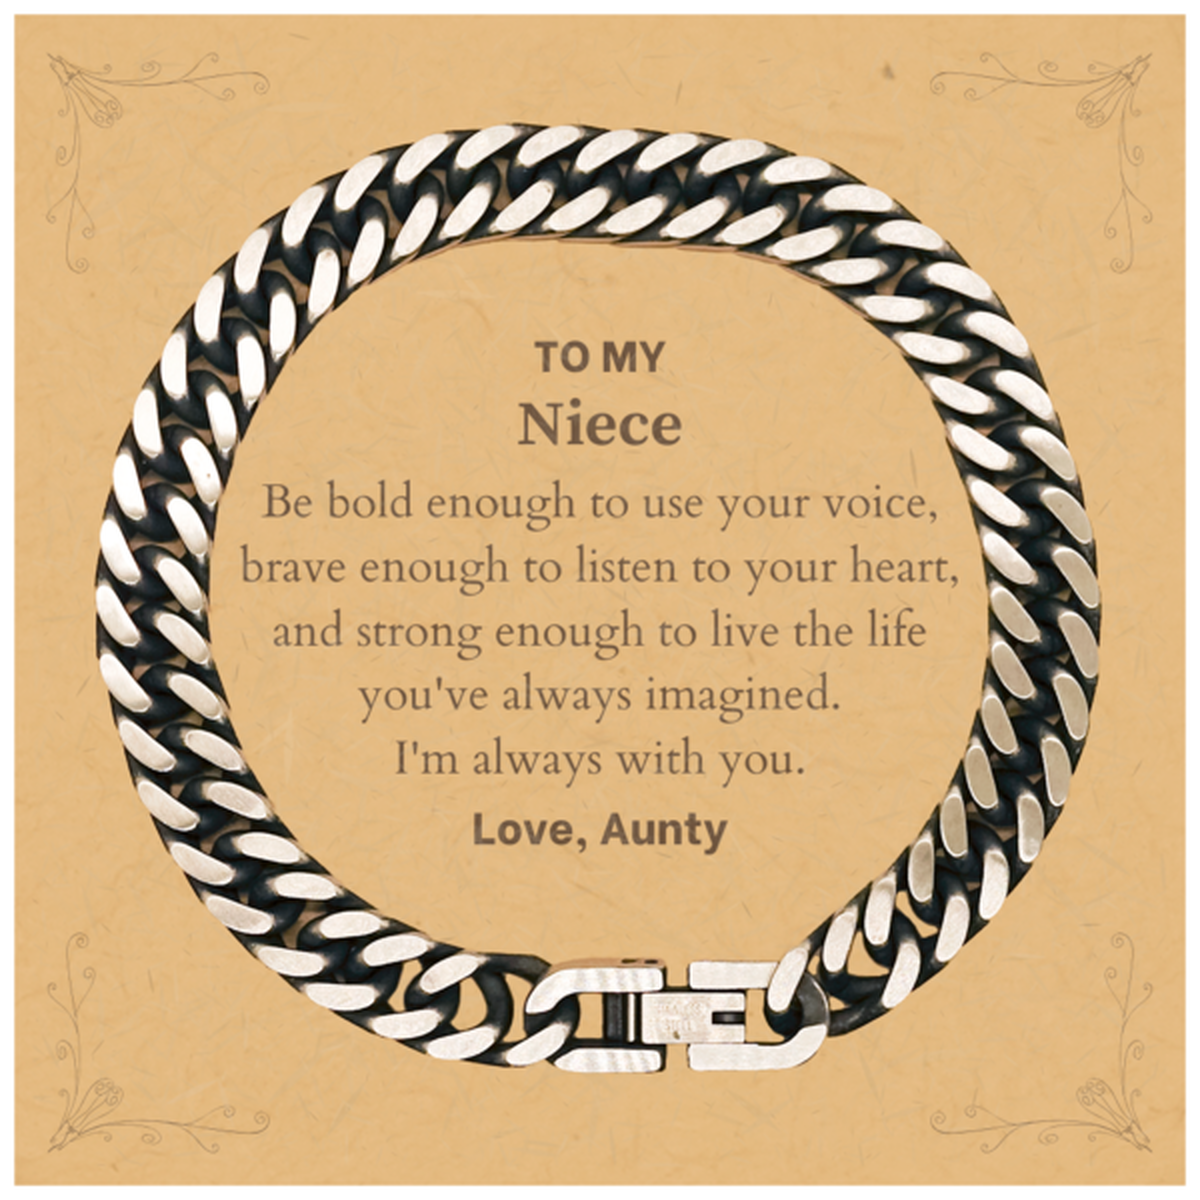 Keepsake Niece Cuban Link Chain Bracelet Gift Idea Graduation Christmas Birthday Niece from Aunty, Niece Be bold enough to use your voice, brave enough to listen to your heart. Love, Aunty